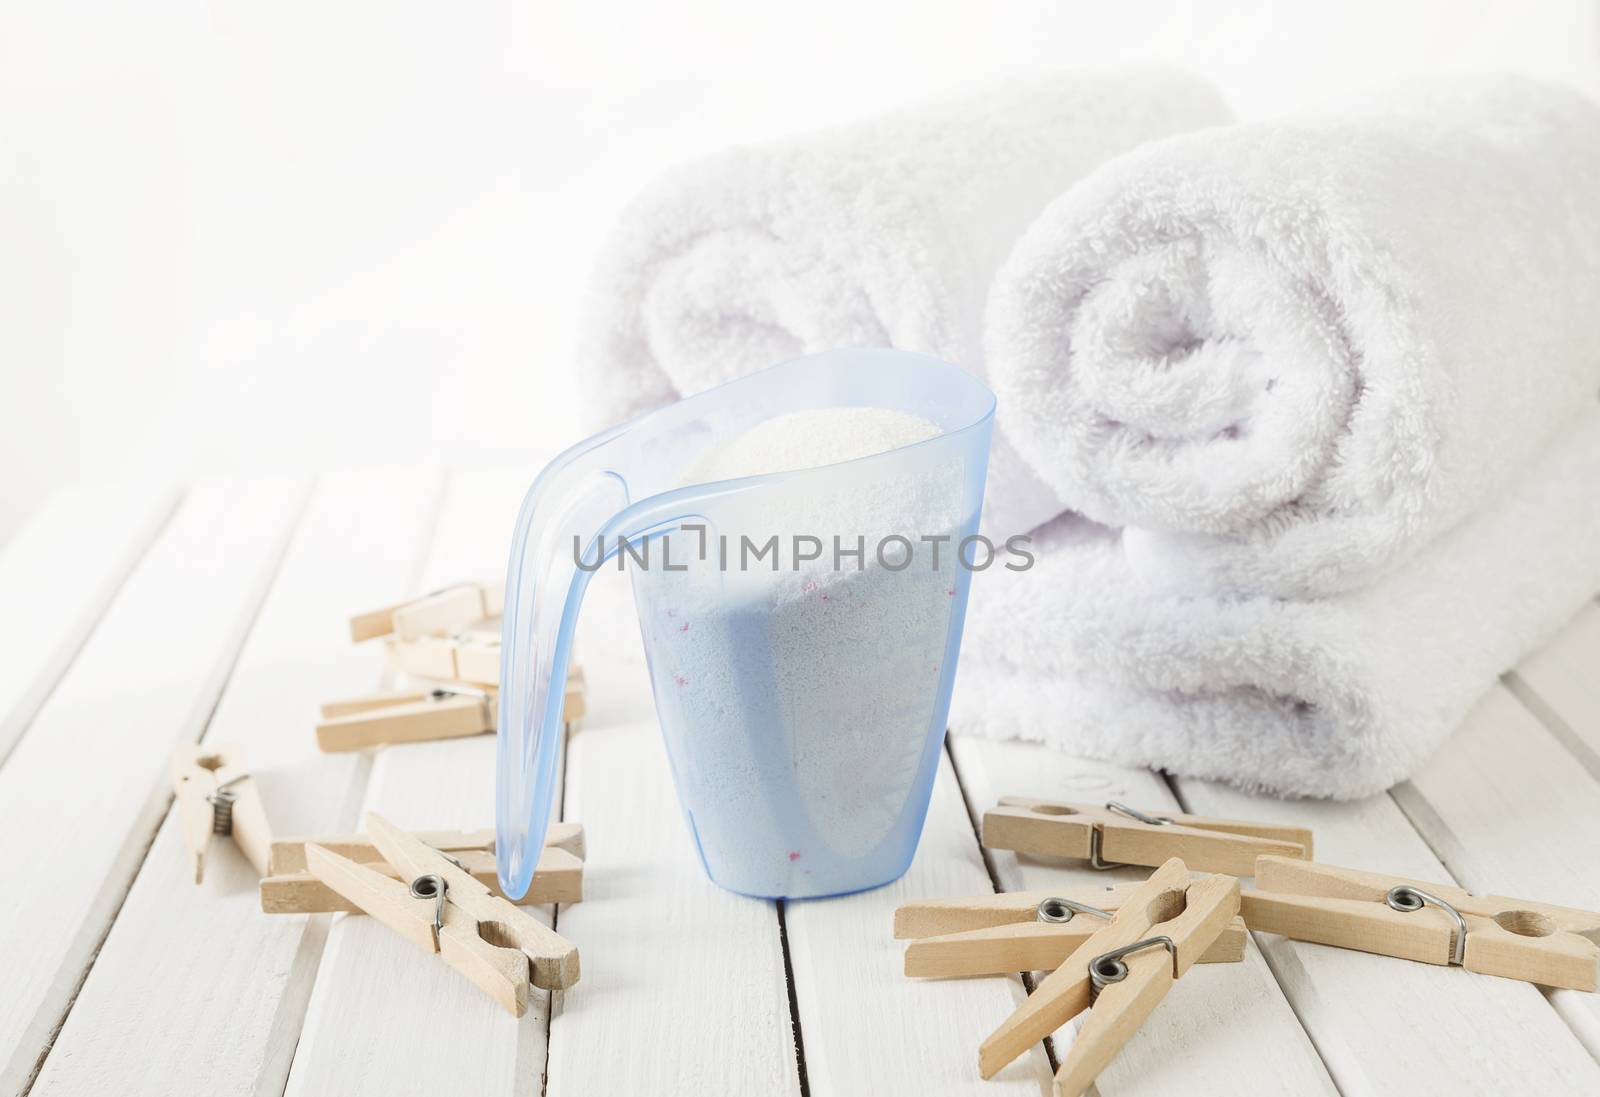 Rolls of white fluffy bath towels, washing powder in measuring cup and wooden clothespins on the background of white boards